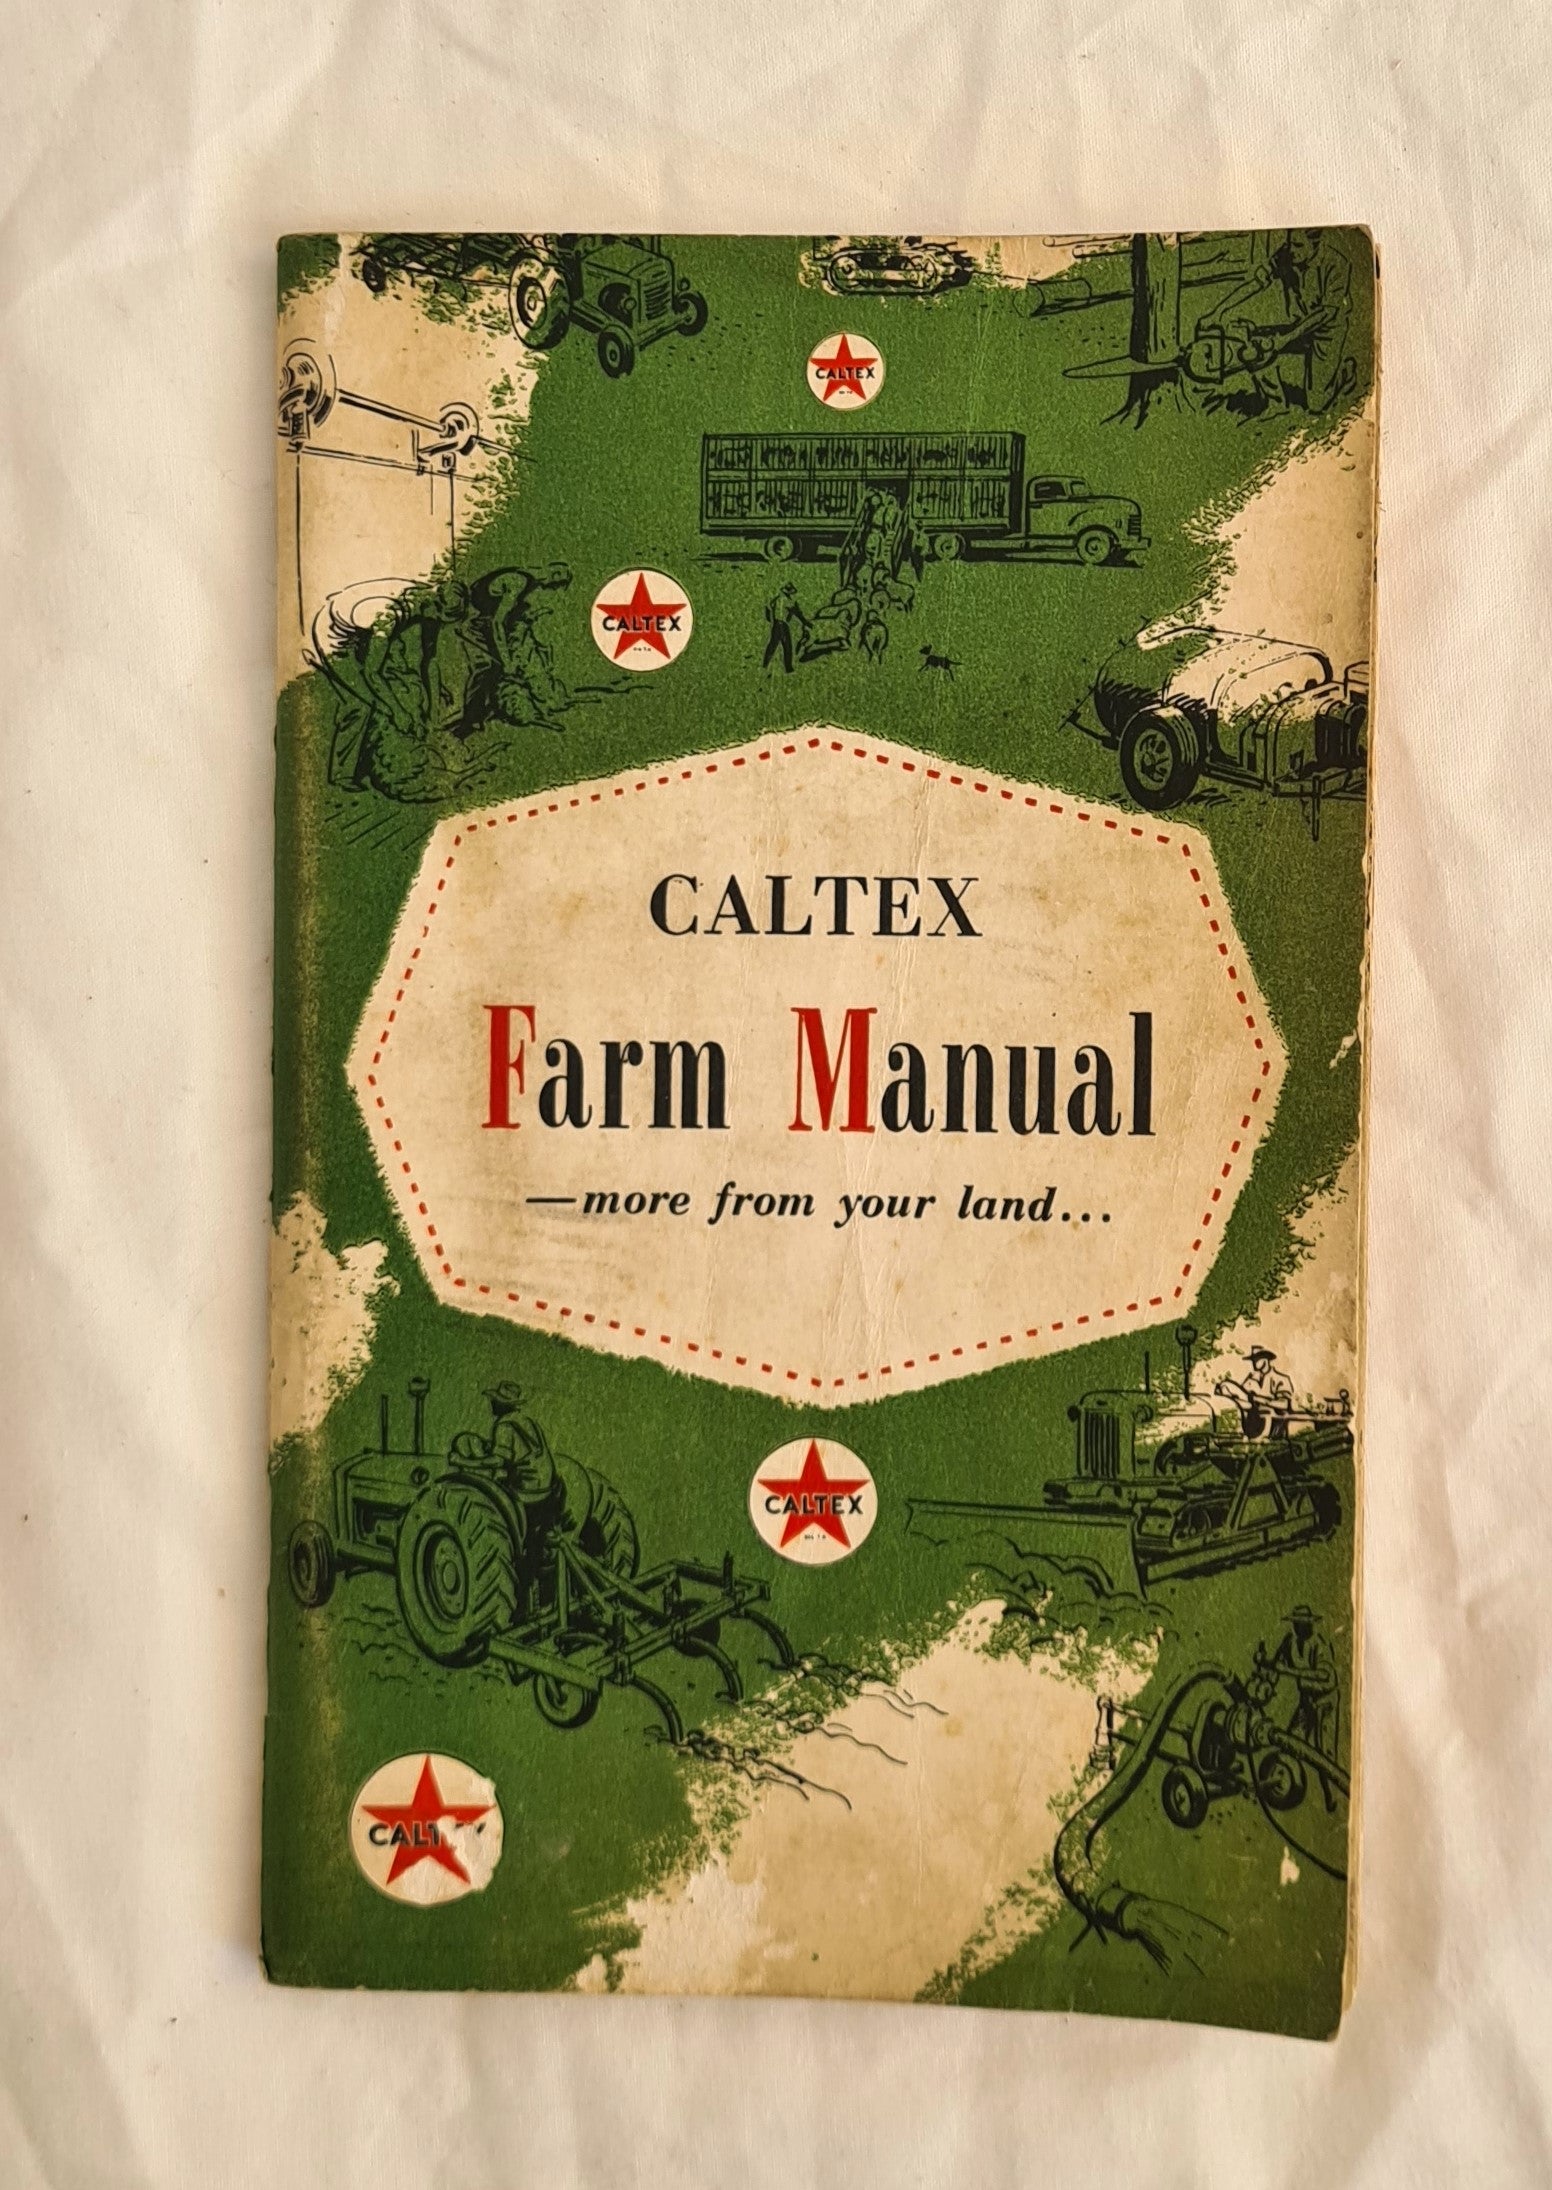 Caltex Farm Manual  more from your land